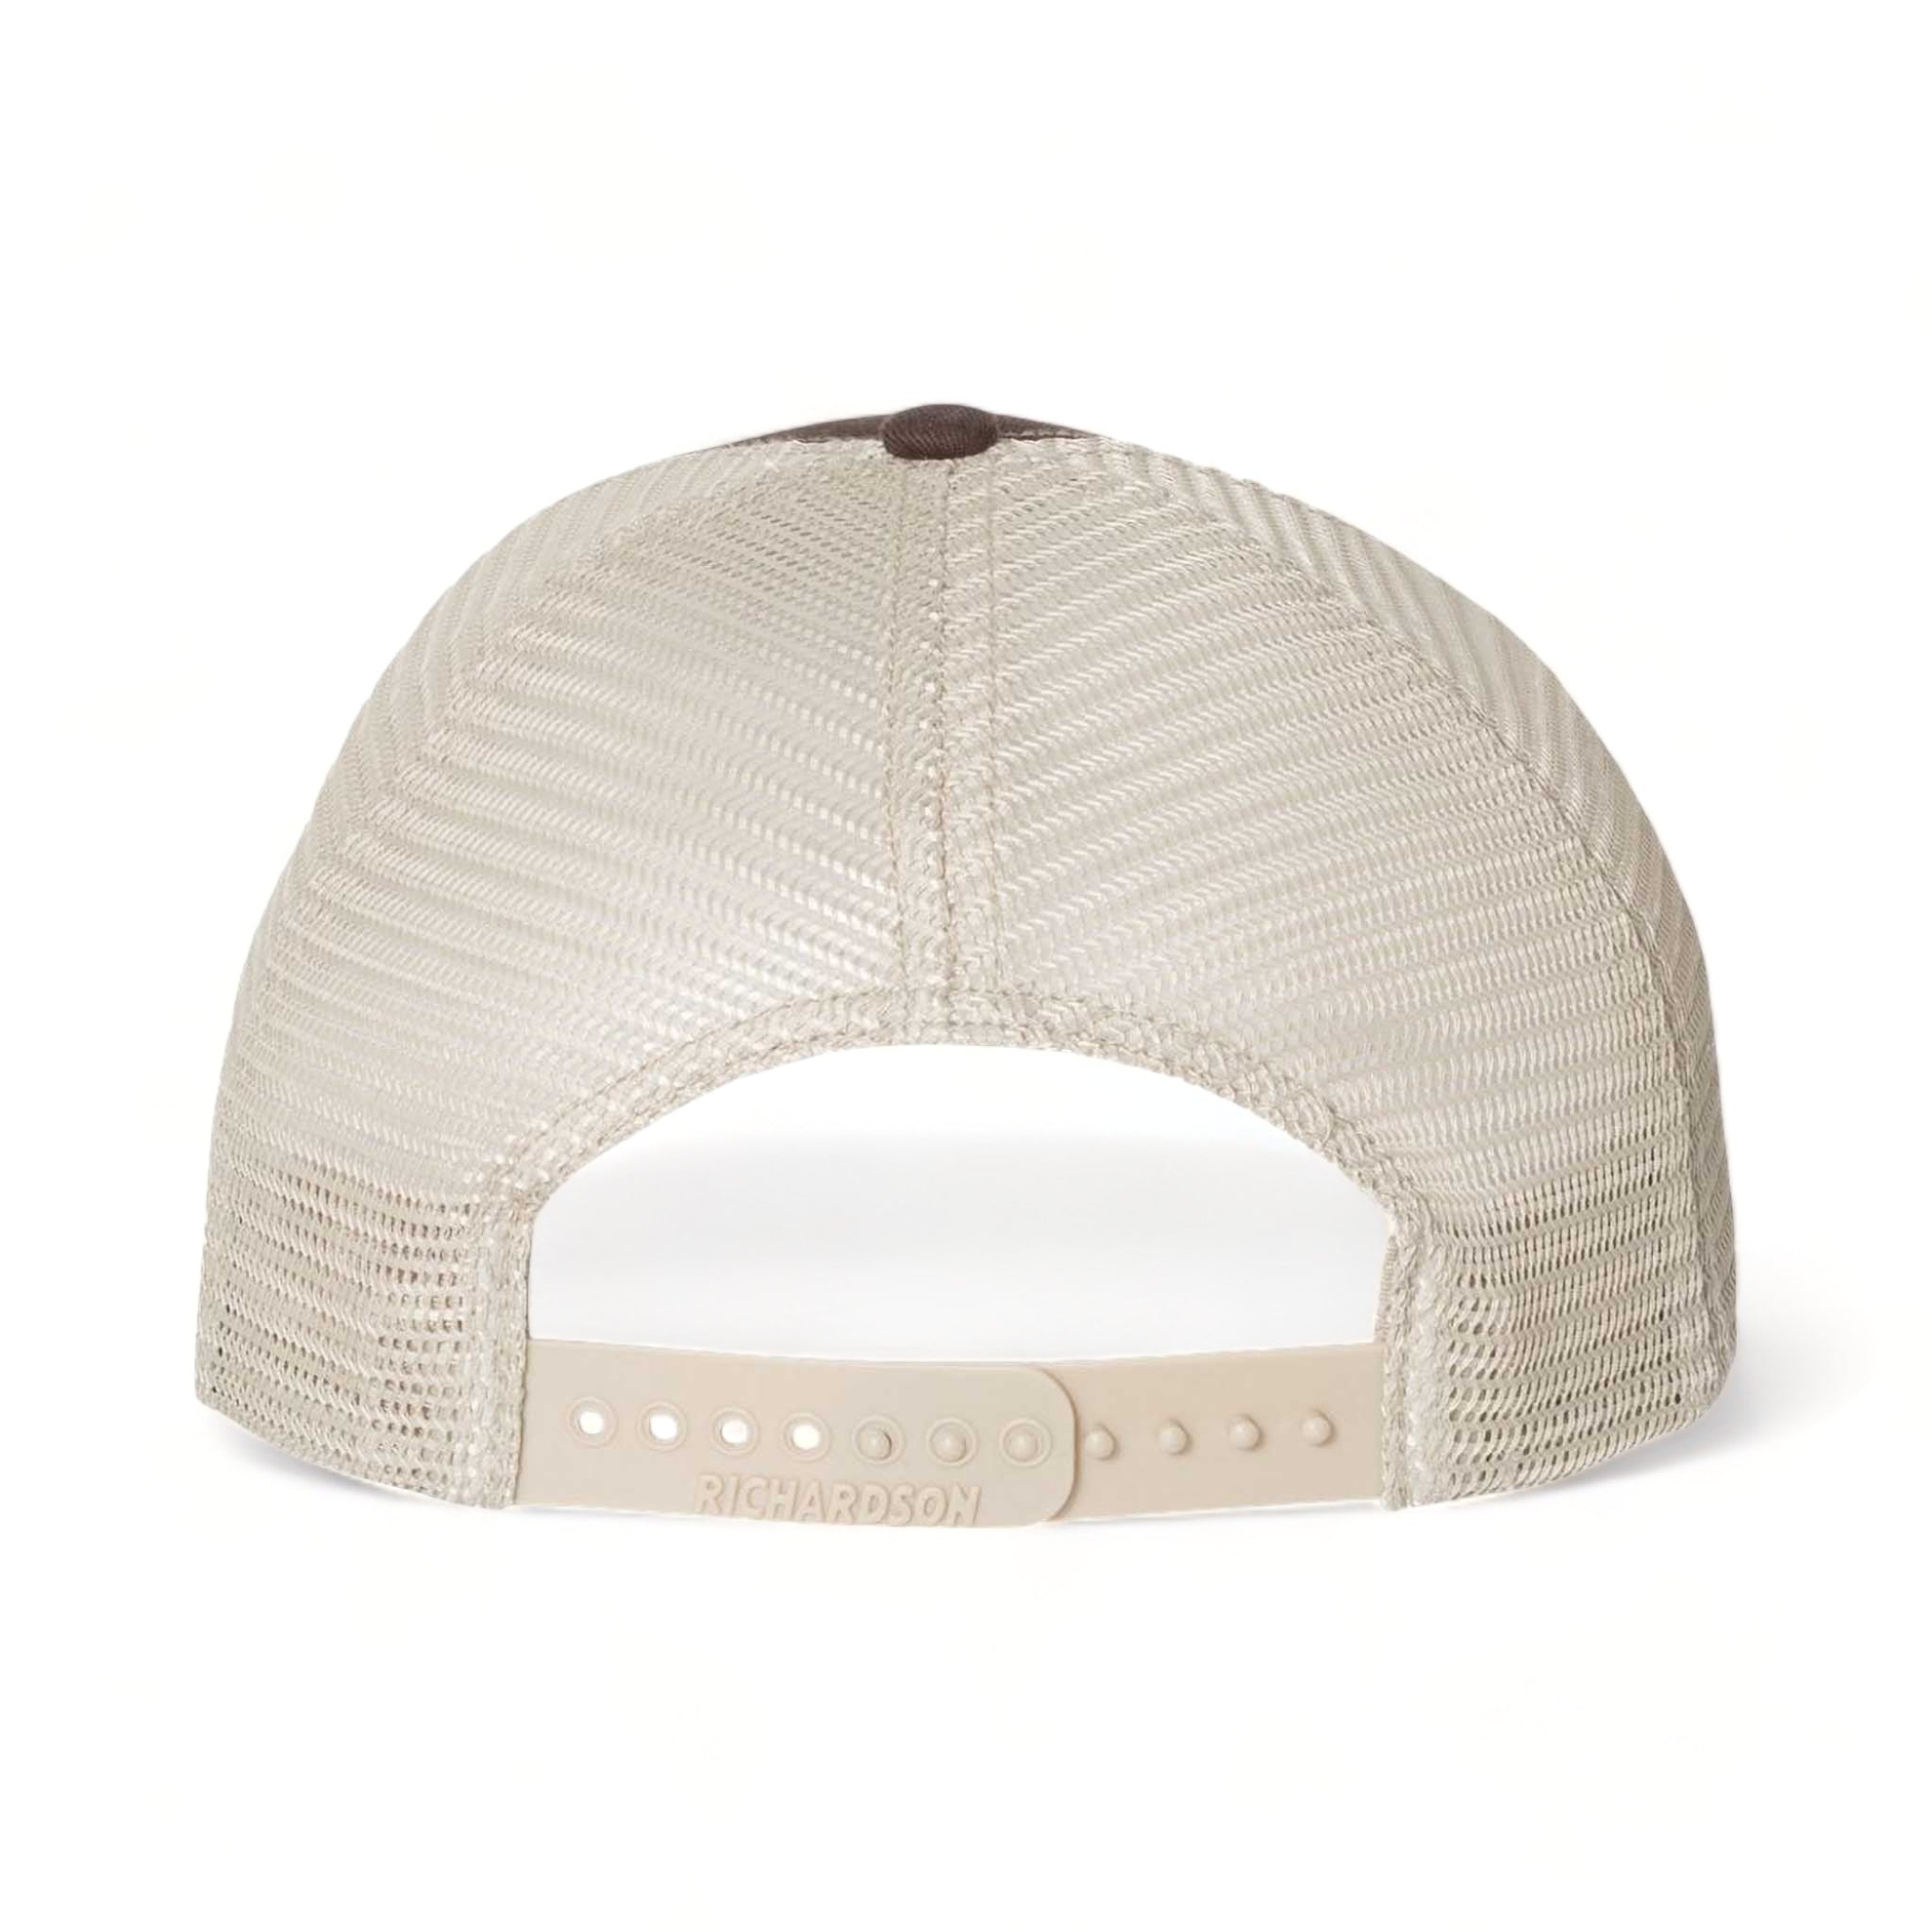 Back view of Richardson 111 custom hat in brown and khaki